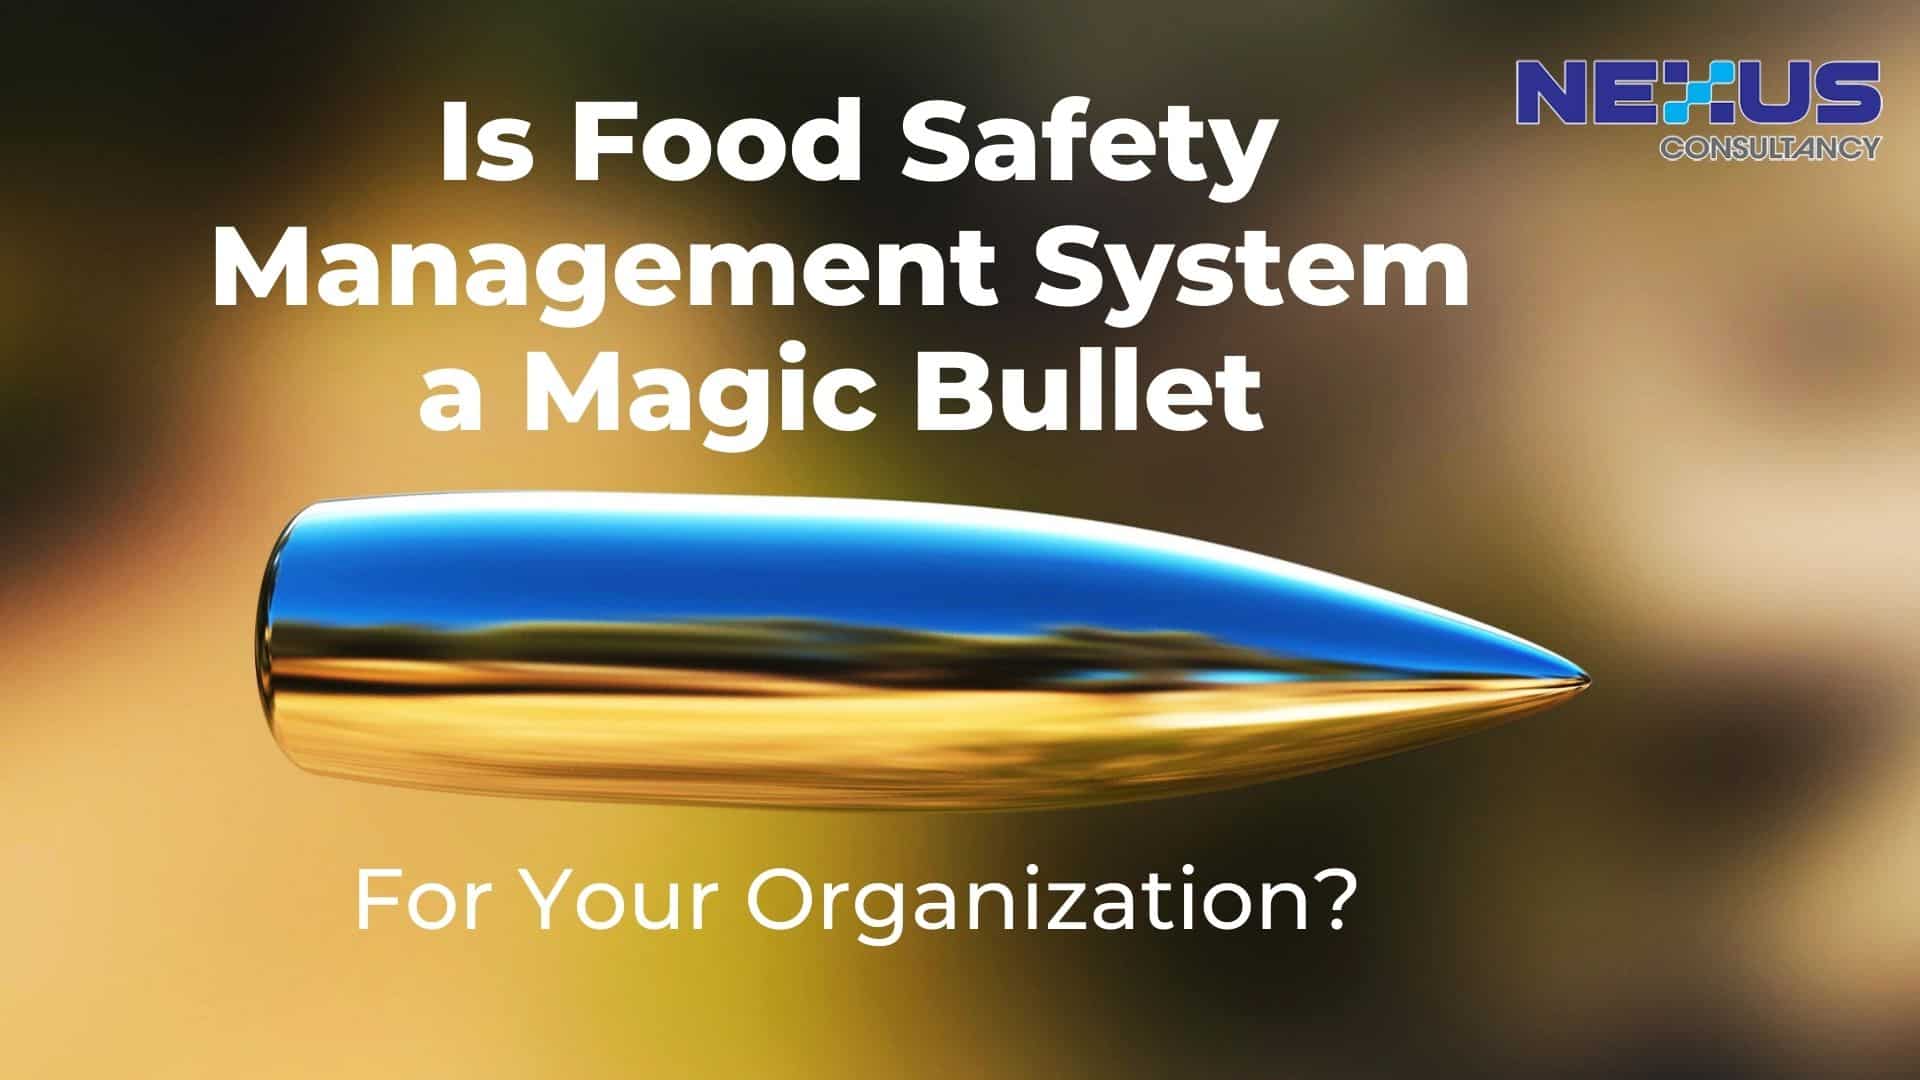 Is Food Safety Management System a Magic Bullet for Your Organization?